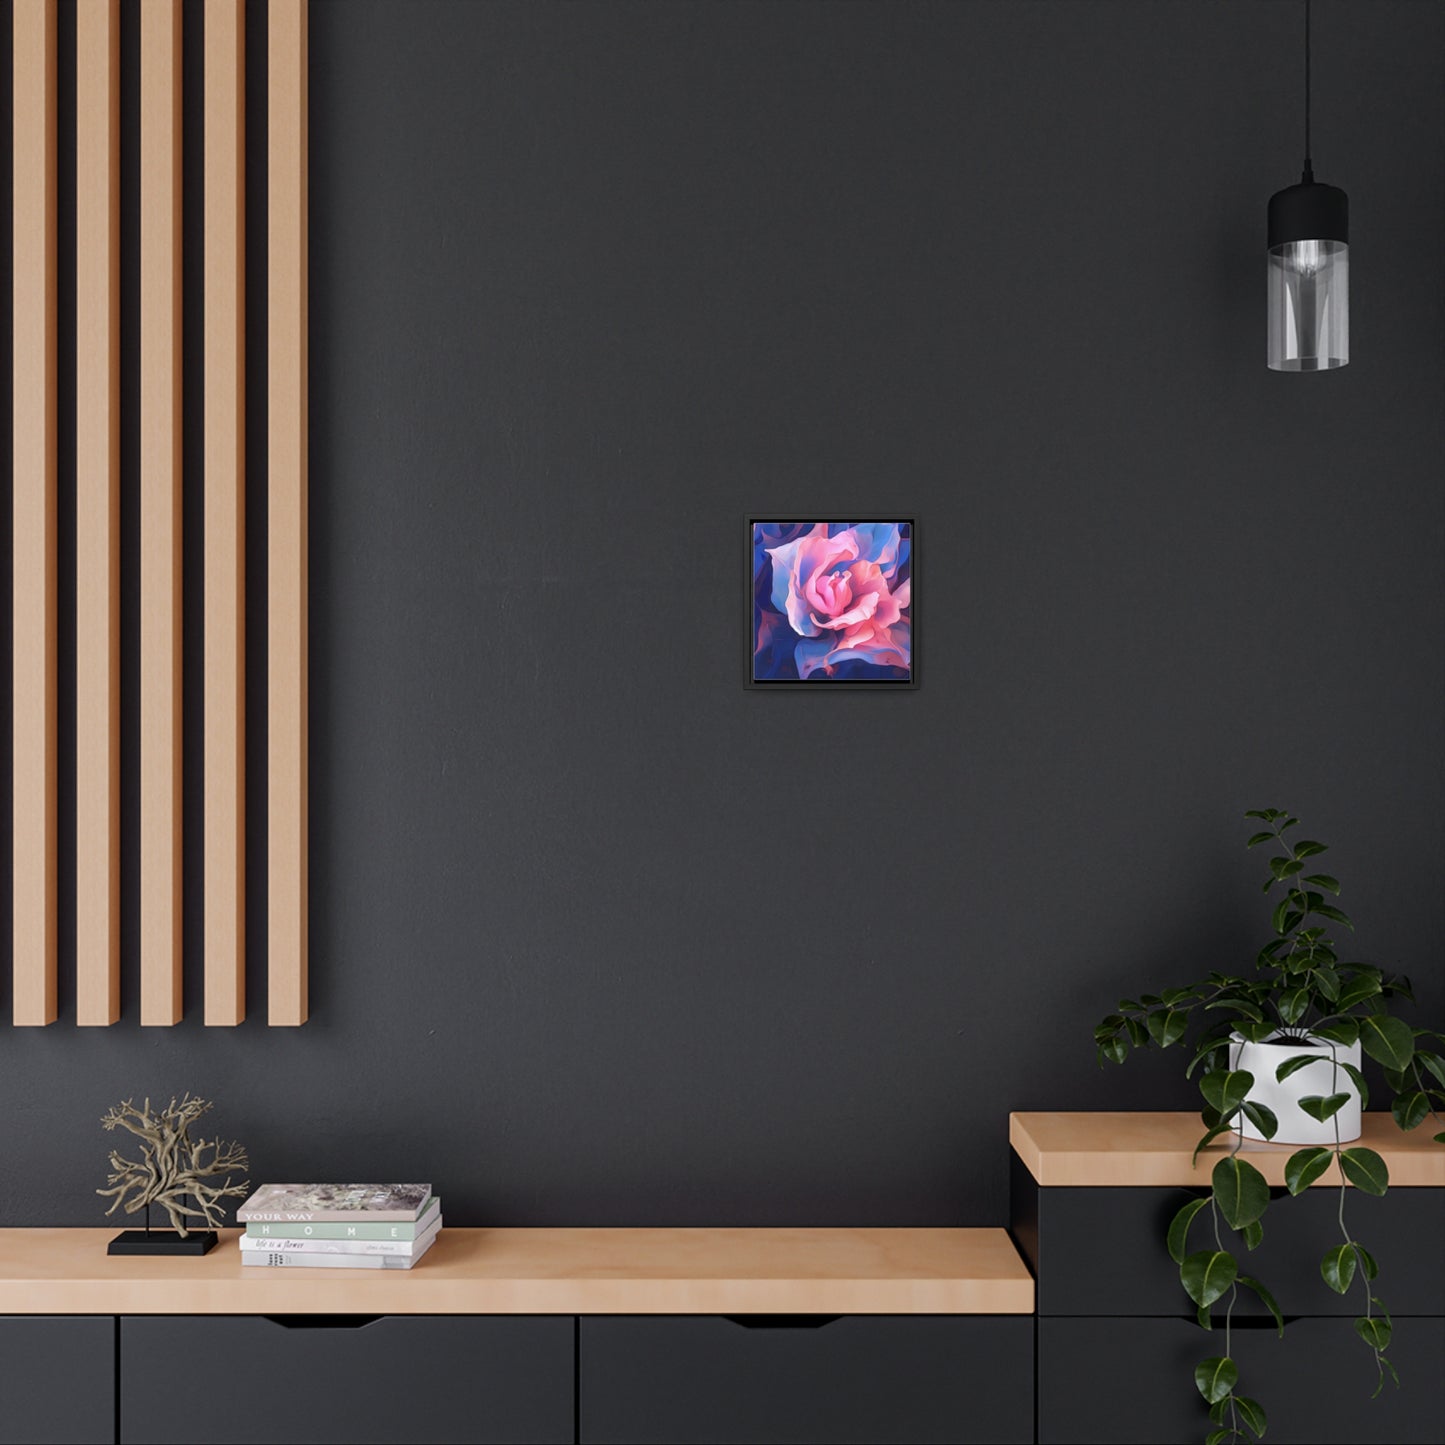 Gallery Canvas Wraps, Square Frame Pink & Blue Tulip Rose 1